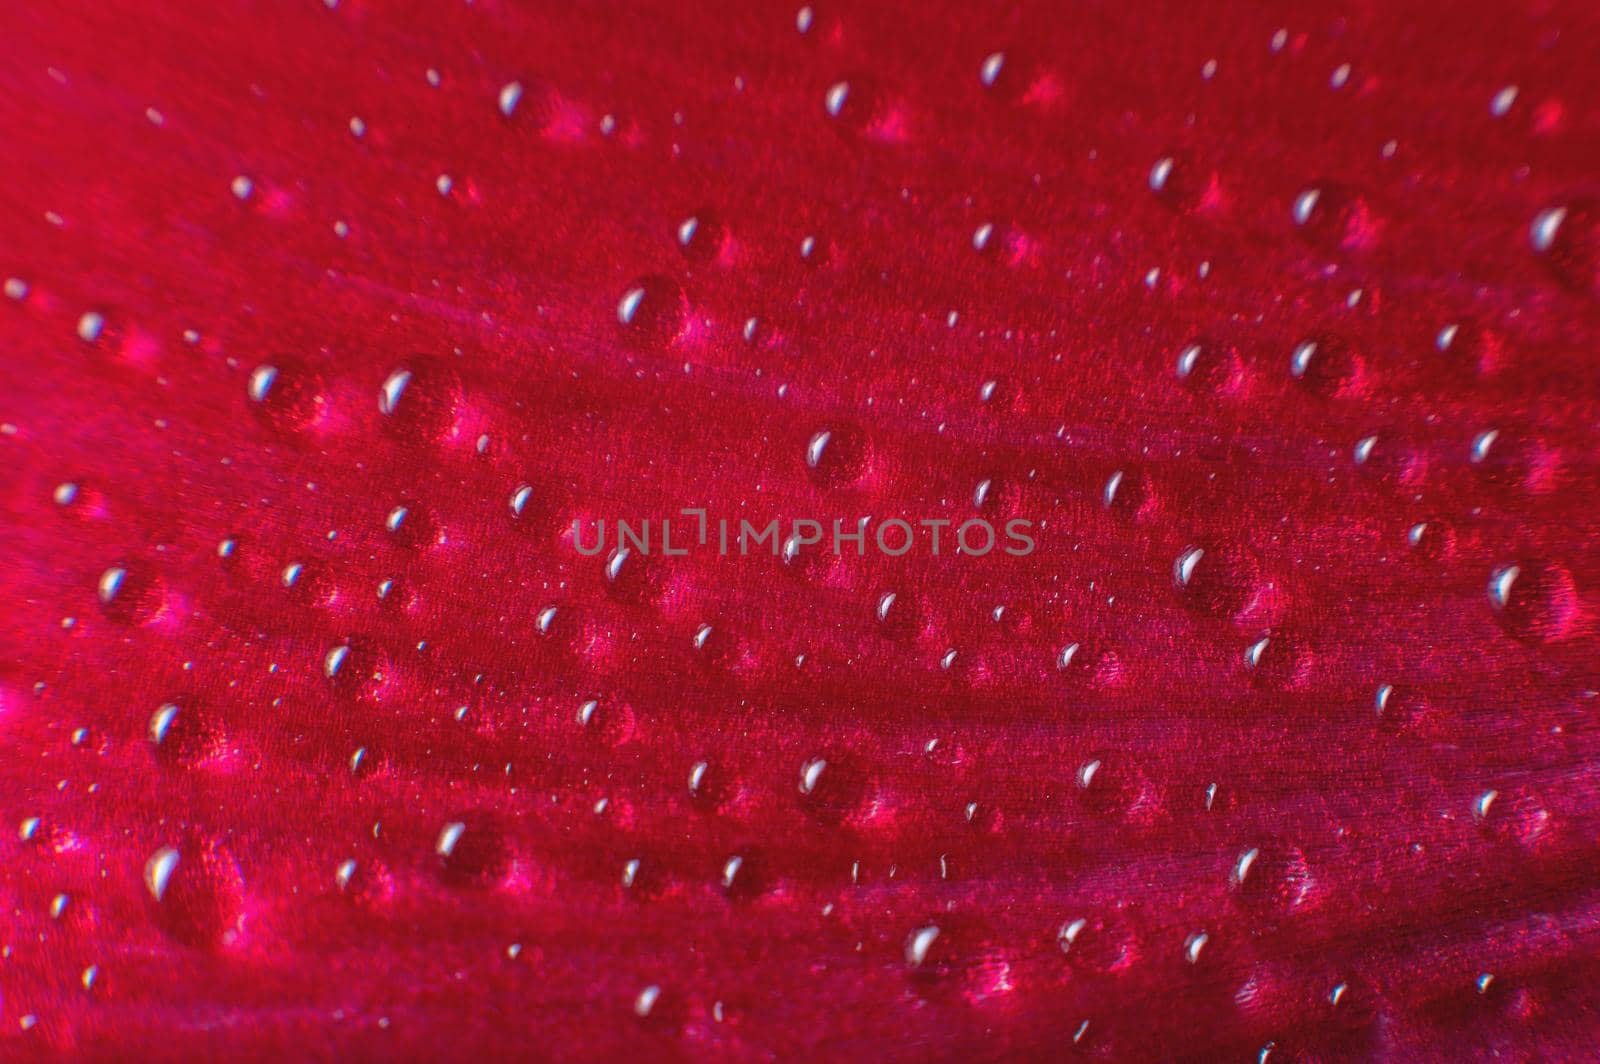 Abstraction Floral macro background. Water drops close-up on pink purple gradient flower with contrast background. Place for text. shallow depth of field abstraction.